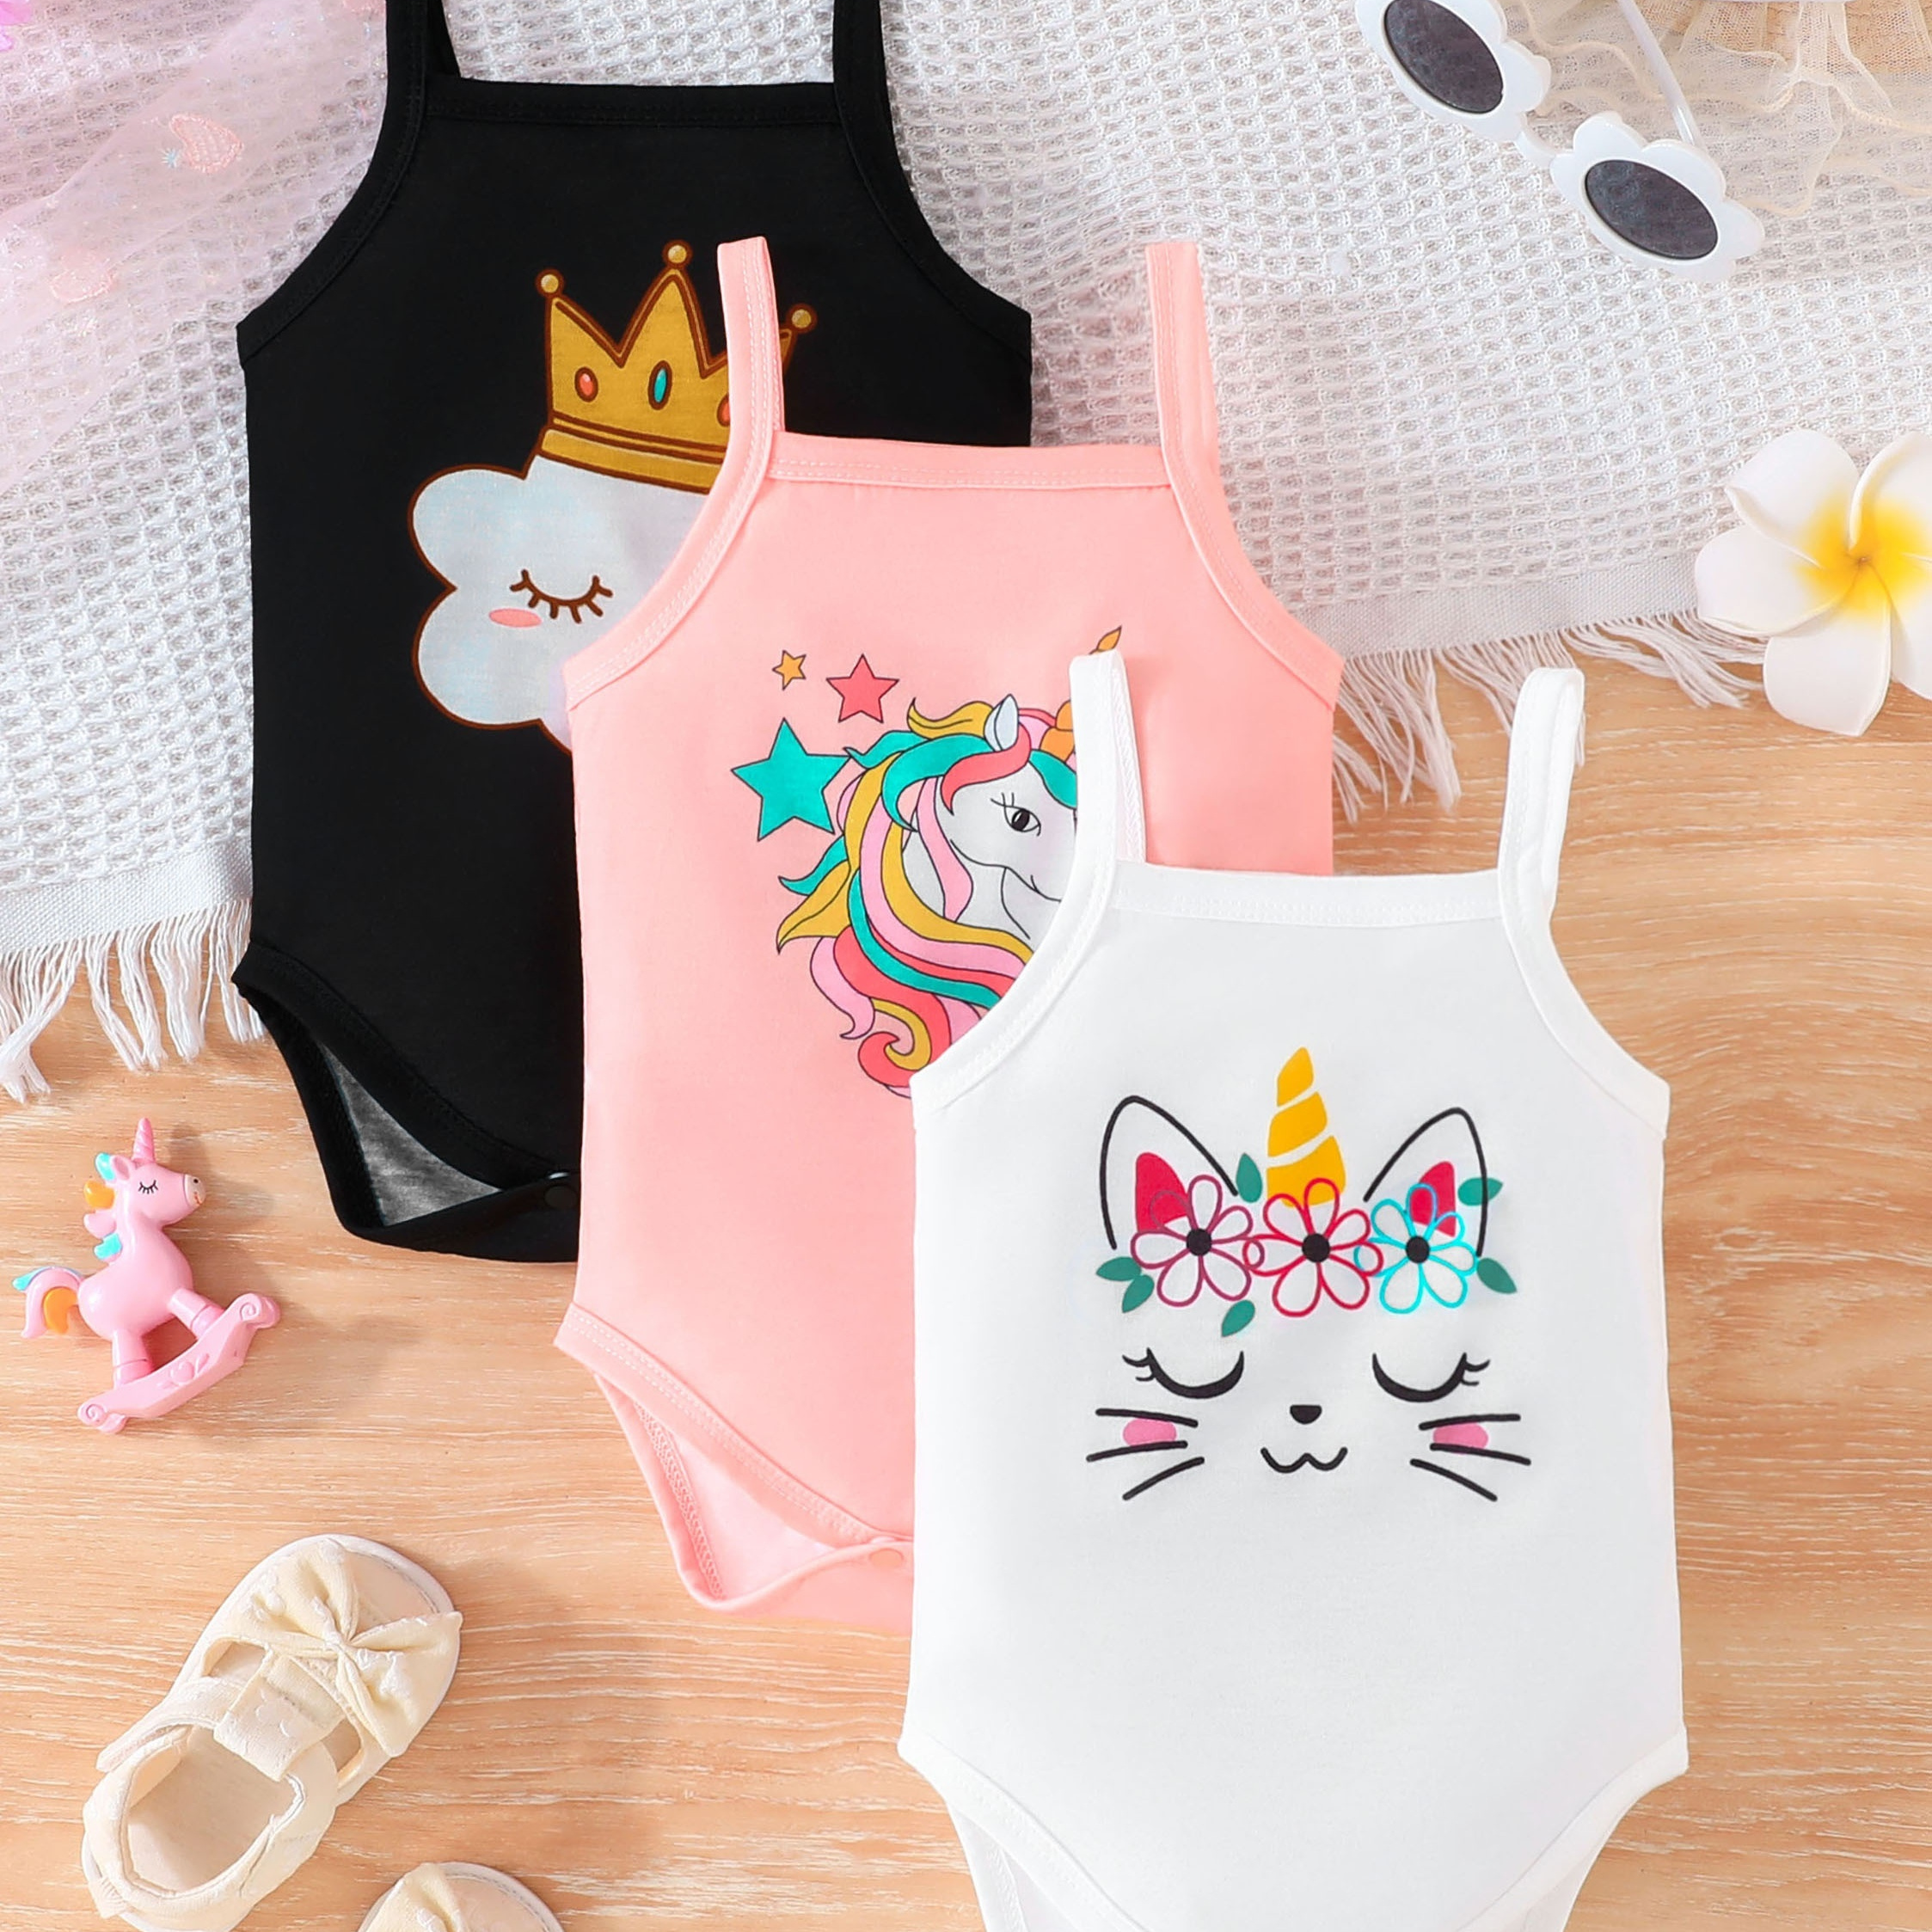 

3pcs Baby's Cartoon Pattern Triangle Bodysuit, Cute Cat & & Cloud Print, Casual Sleeveless Romper, Toddler & Infant Girl's Onesie For Summer, As Gift